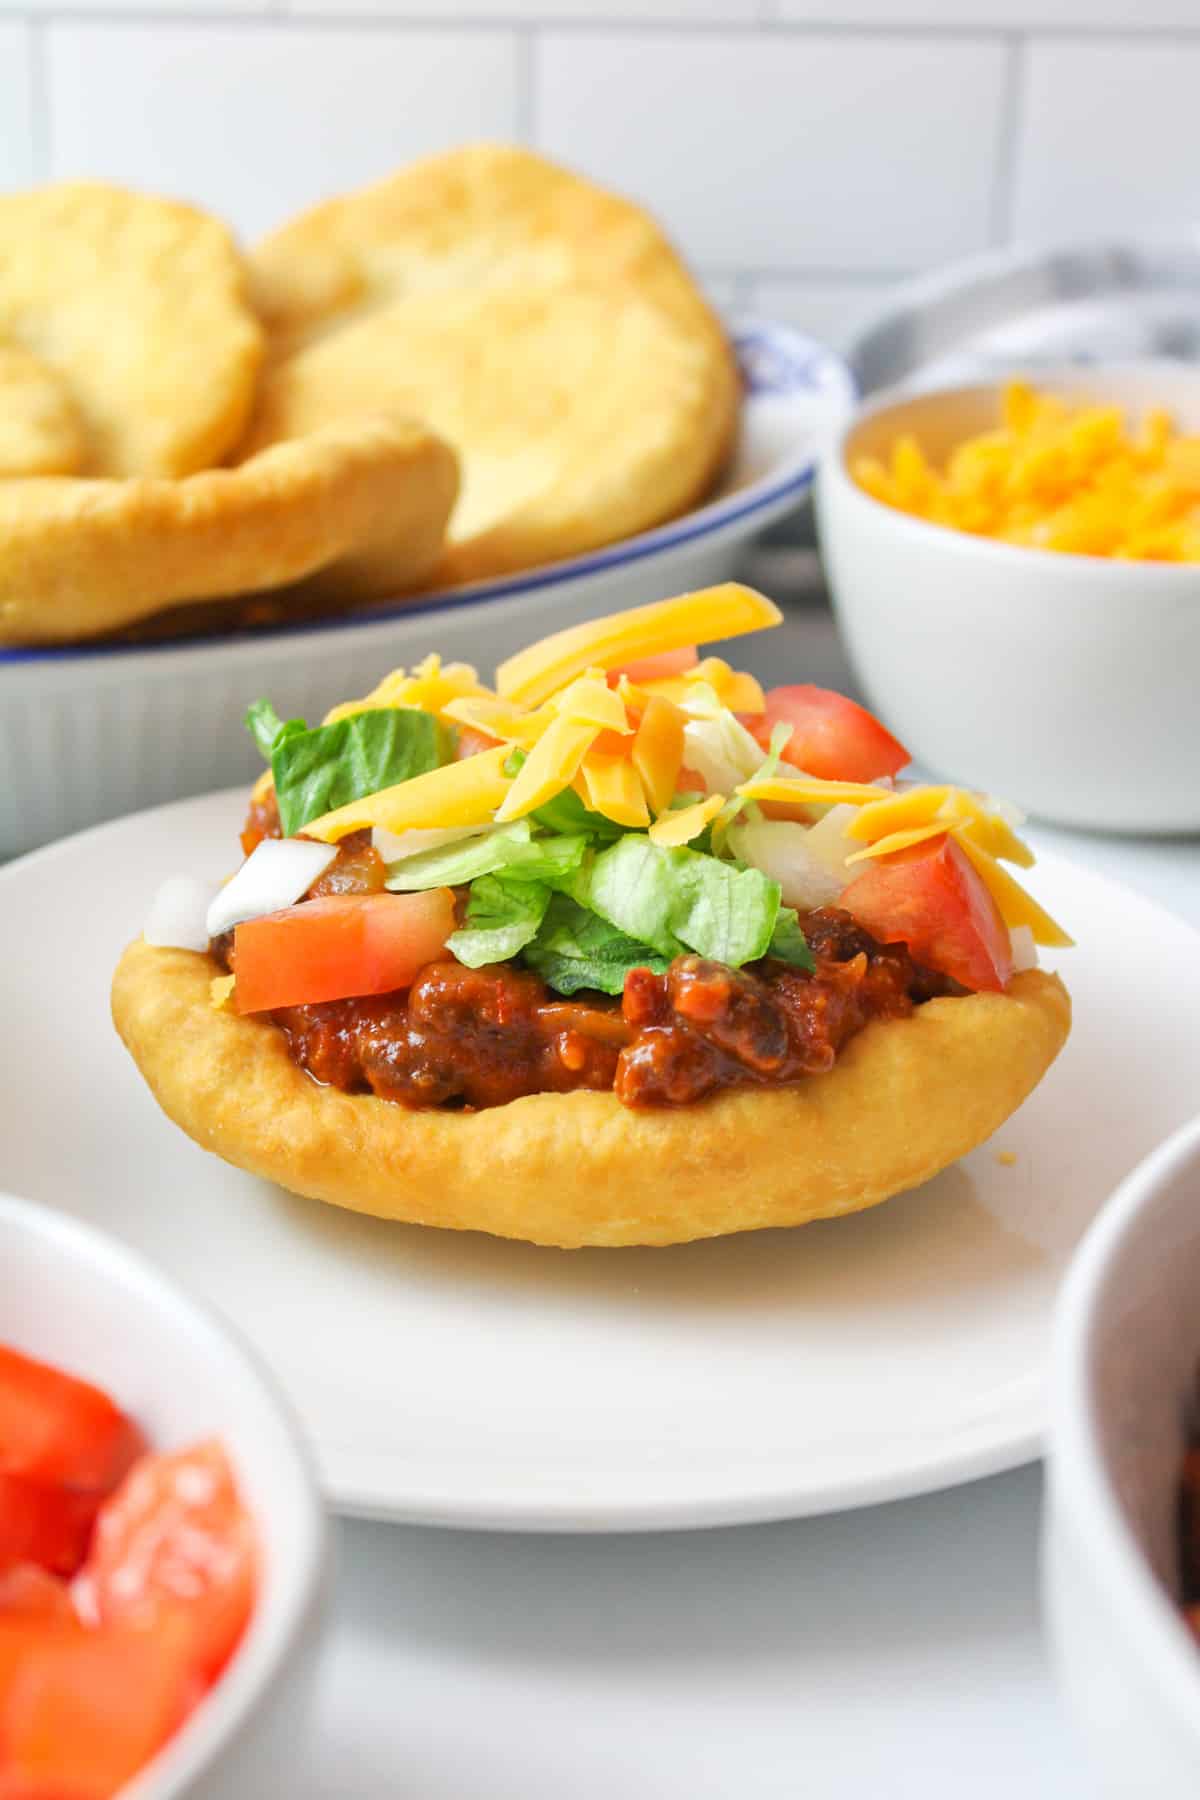 a piece of fry bread on a plate topped with chili, lettuce, tomatoes, onion and cheese to make an indian taco. More frybread and toppings in background